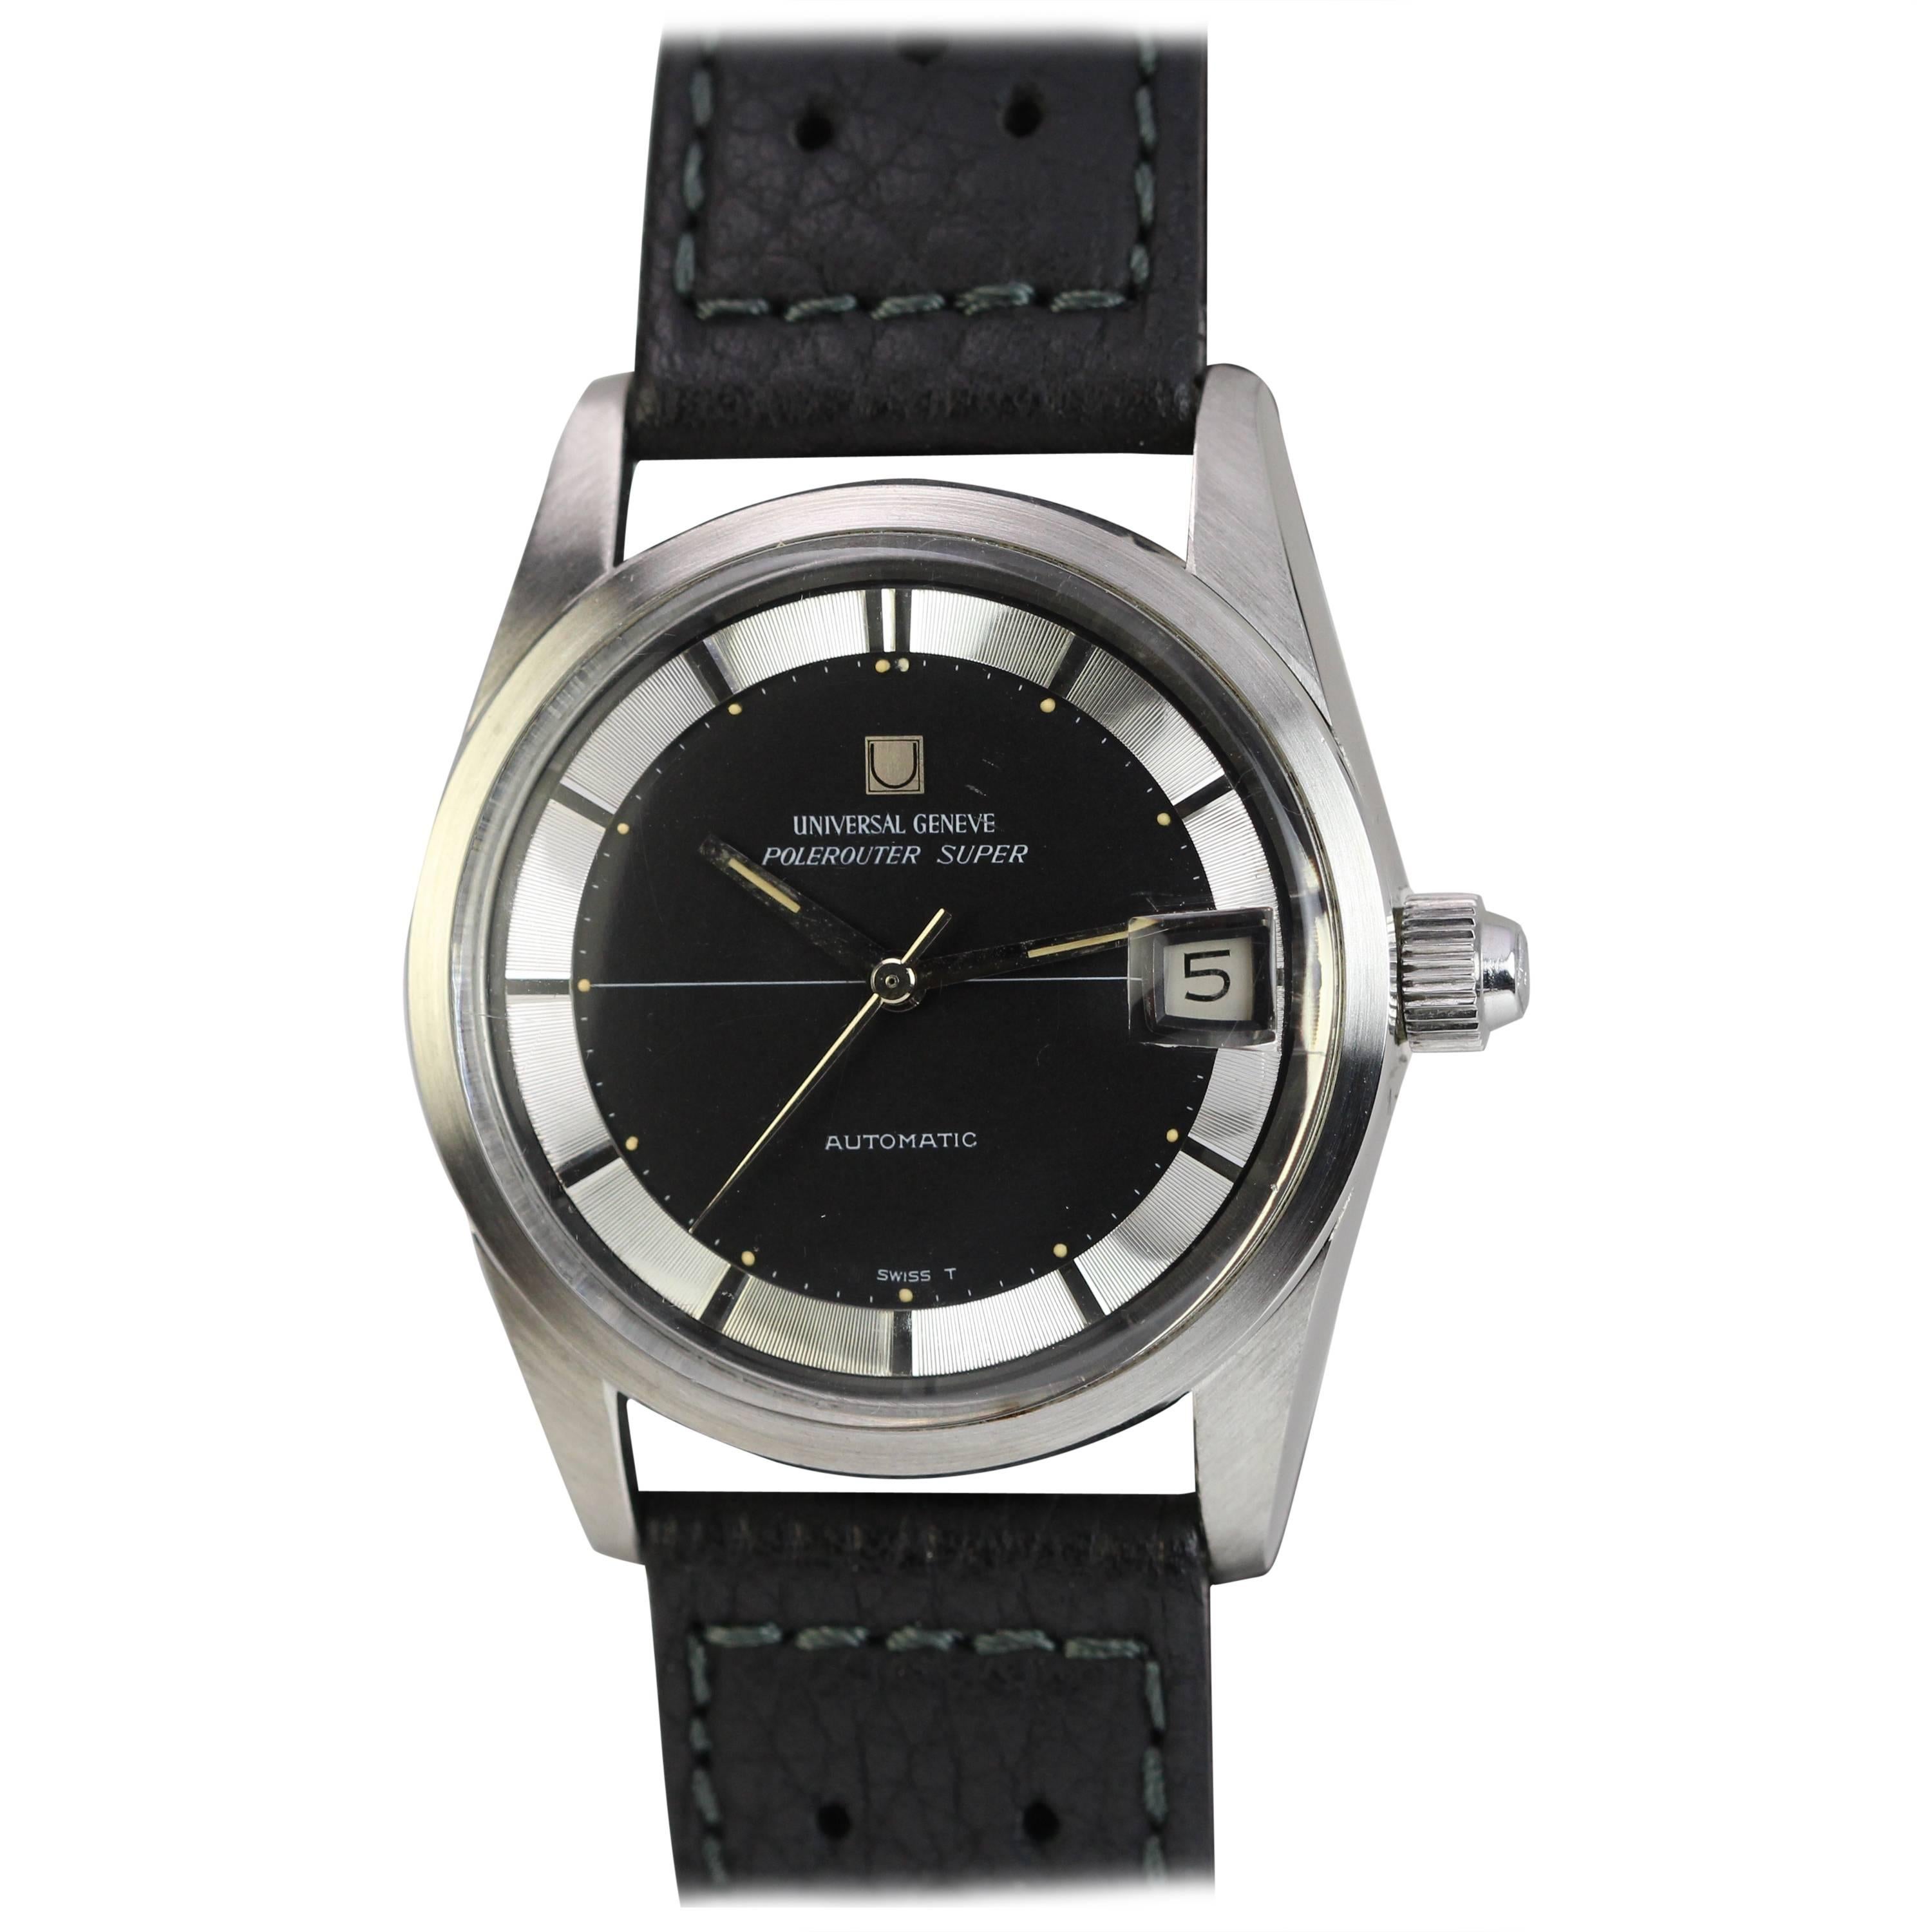 Universal Geneve Stainless Steel "Polerouter Super" Automatic Wristwatch